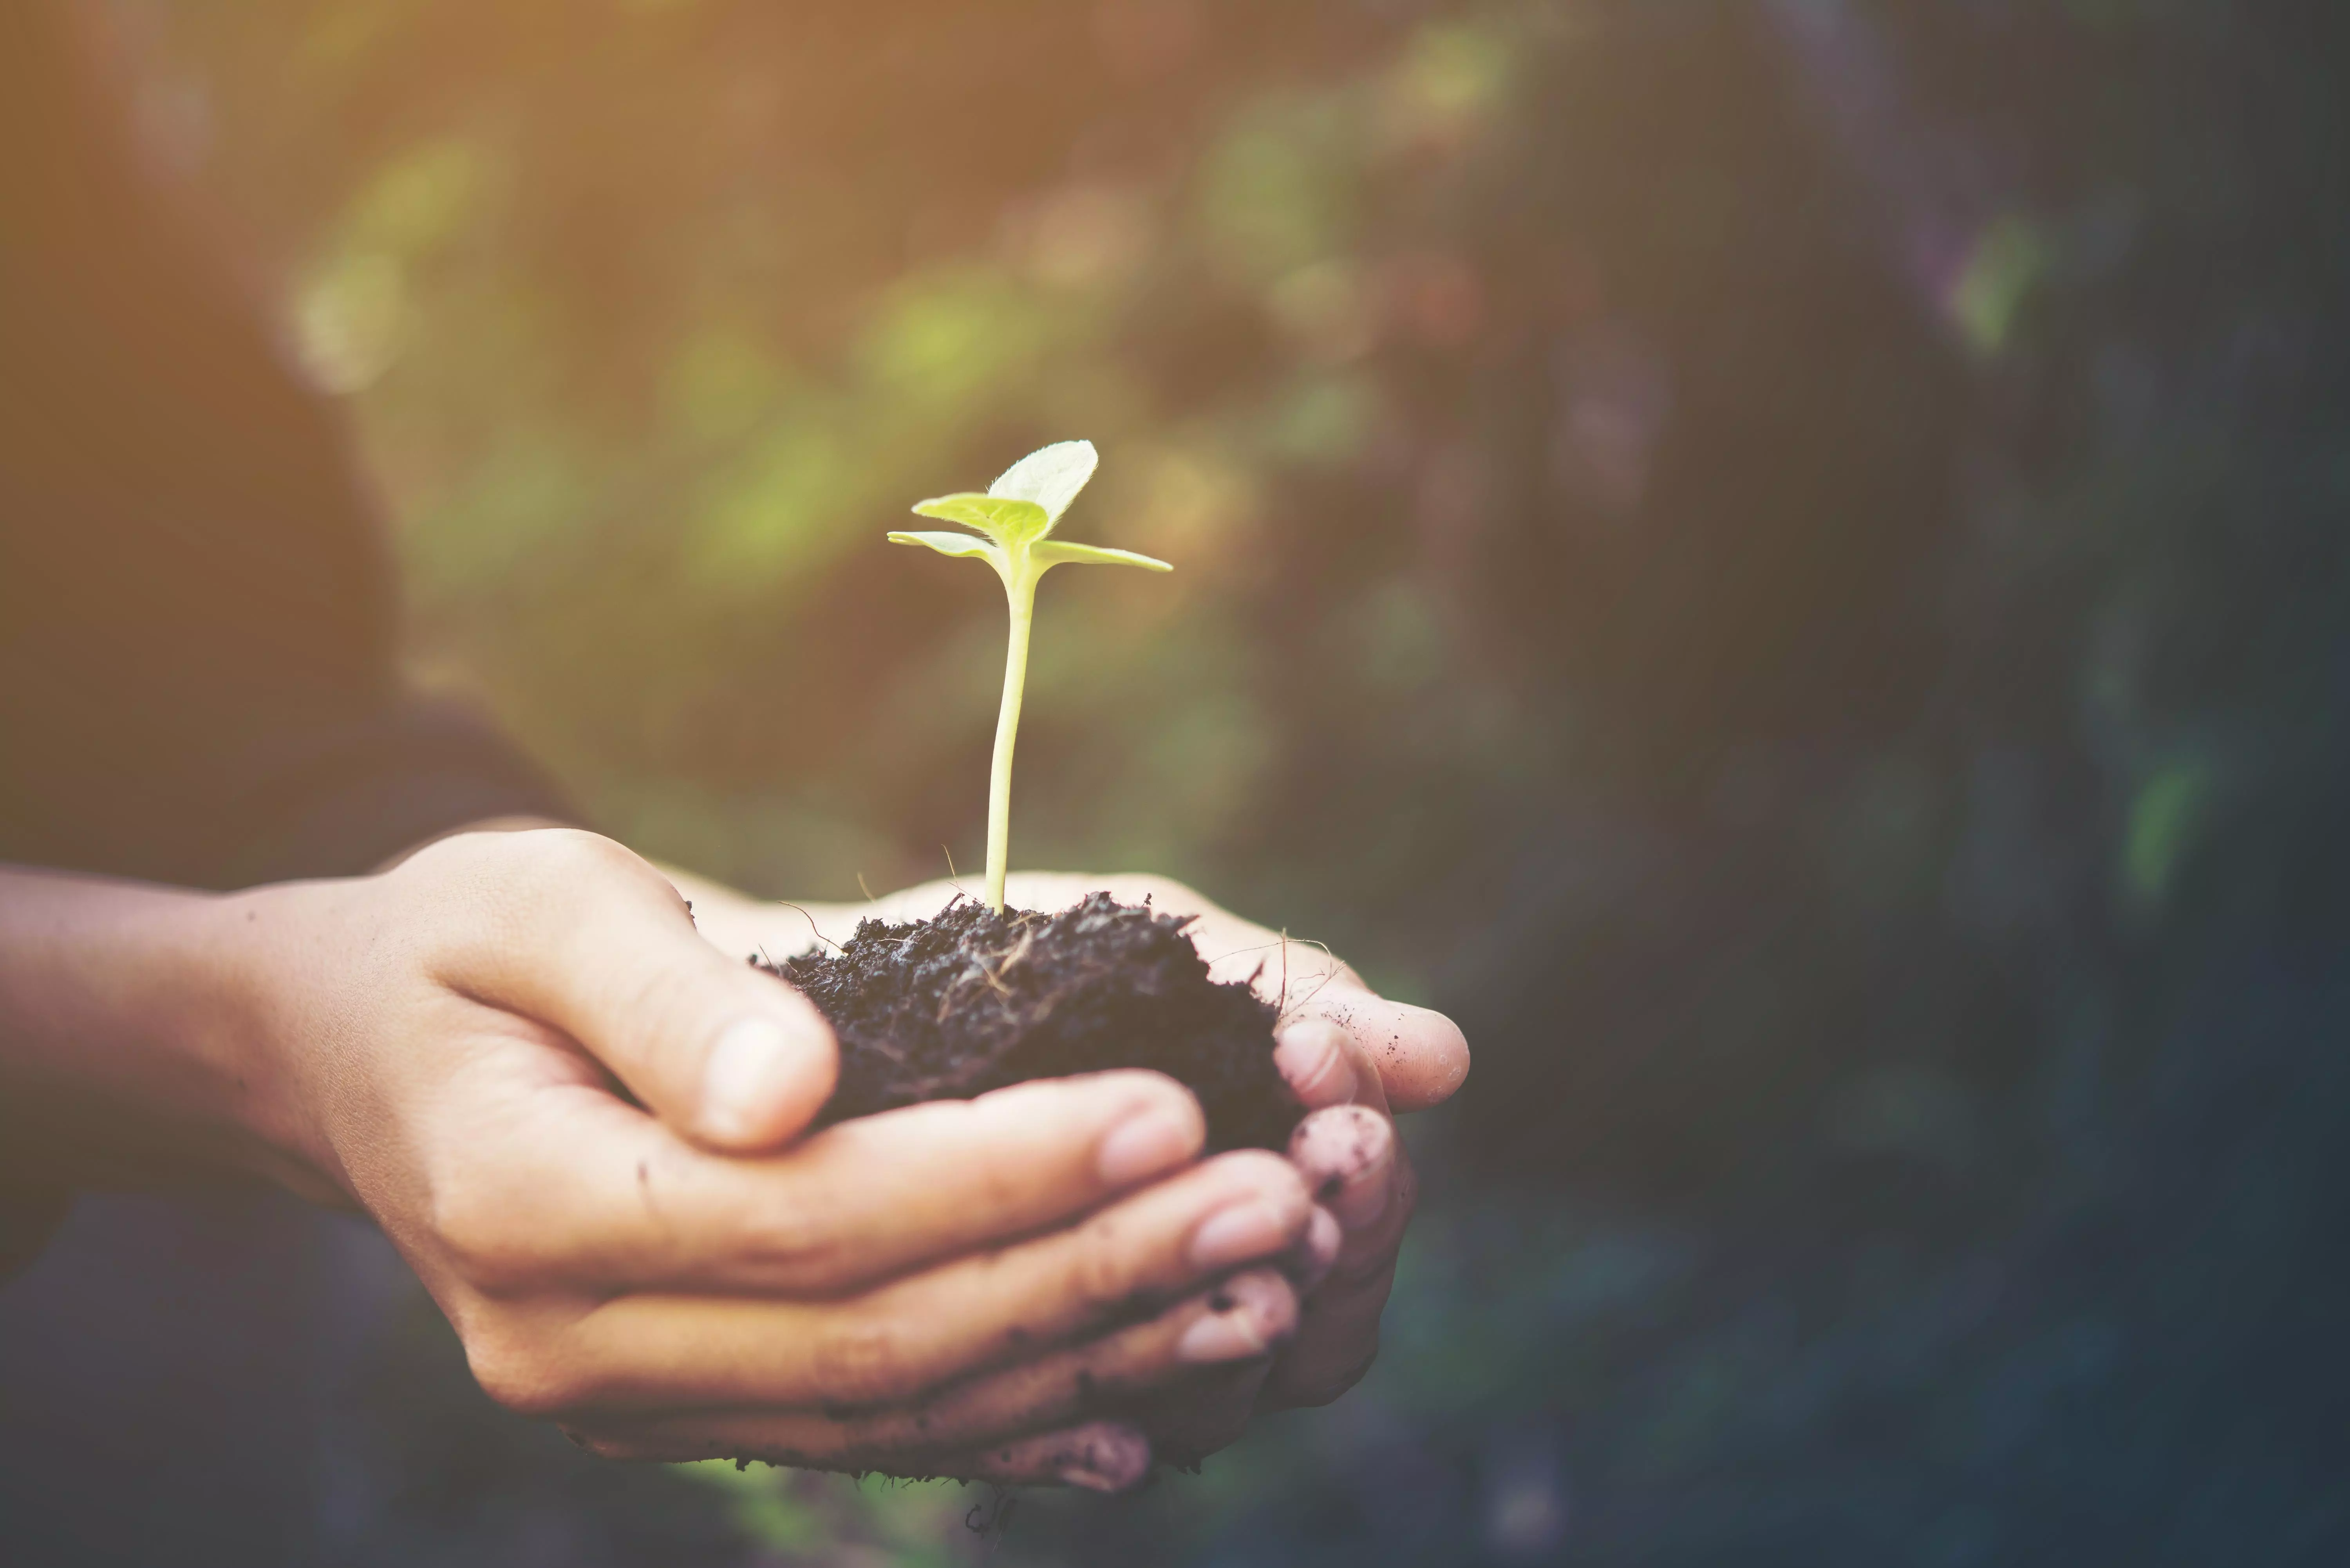 Photo of a person's hands cupped together holding some soil with a seedling growing strongly towards bright sunshine